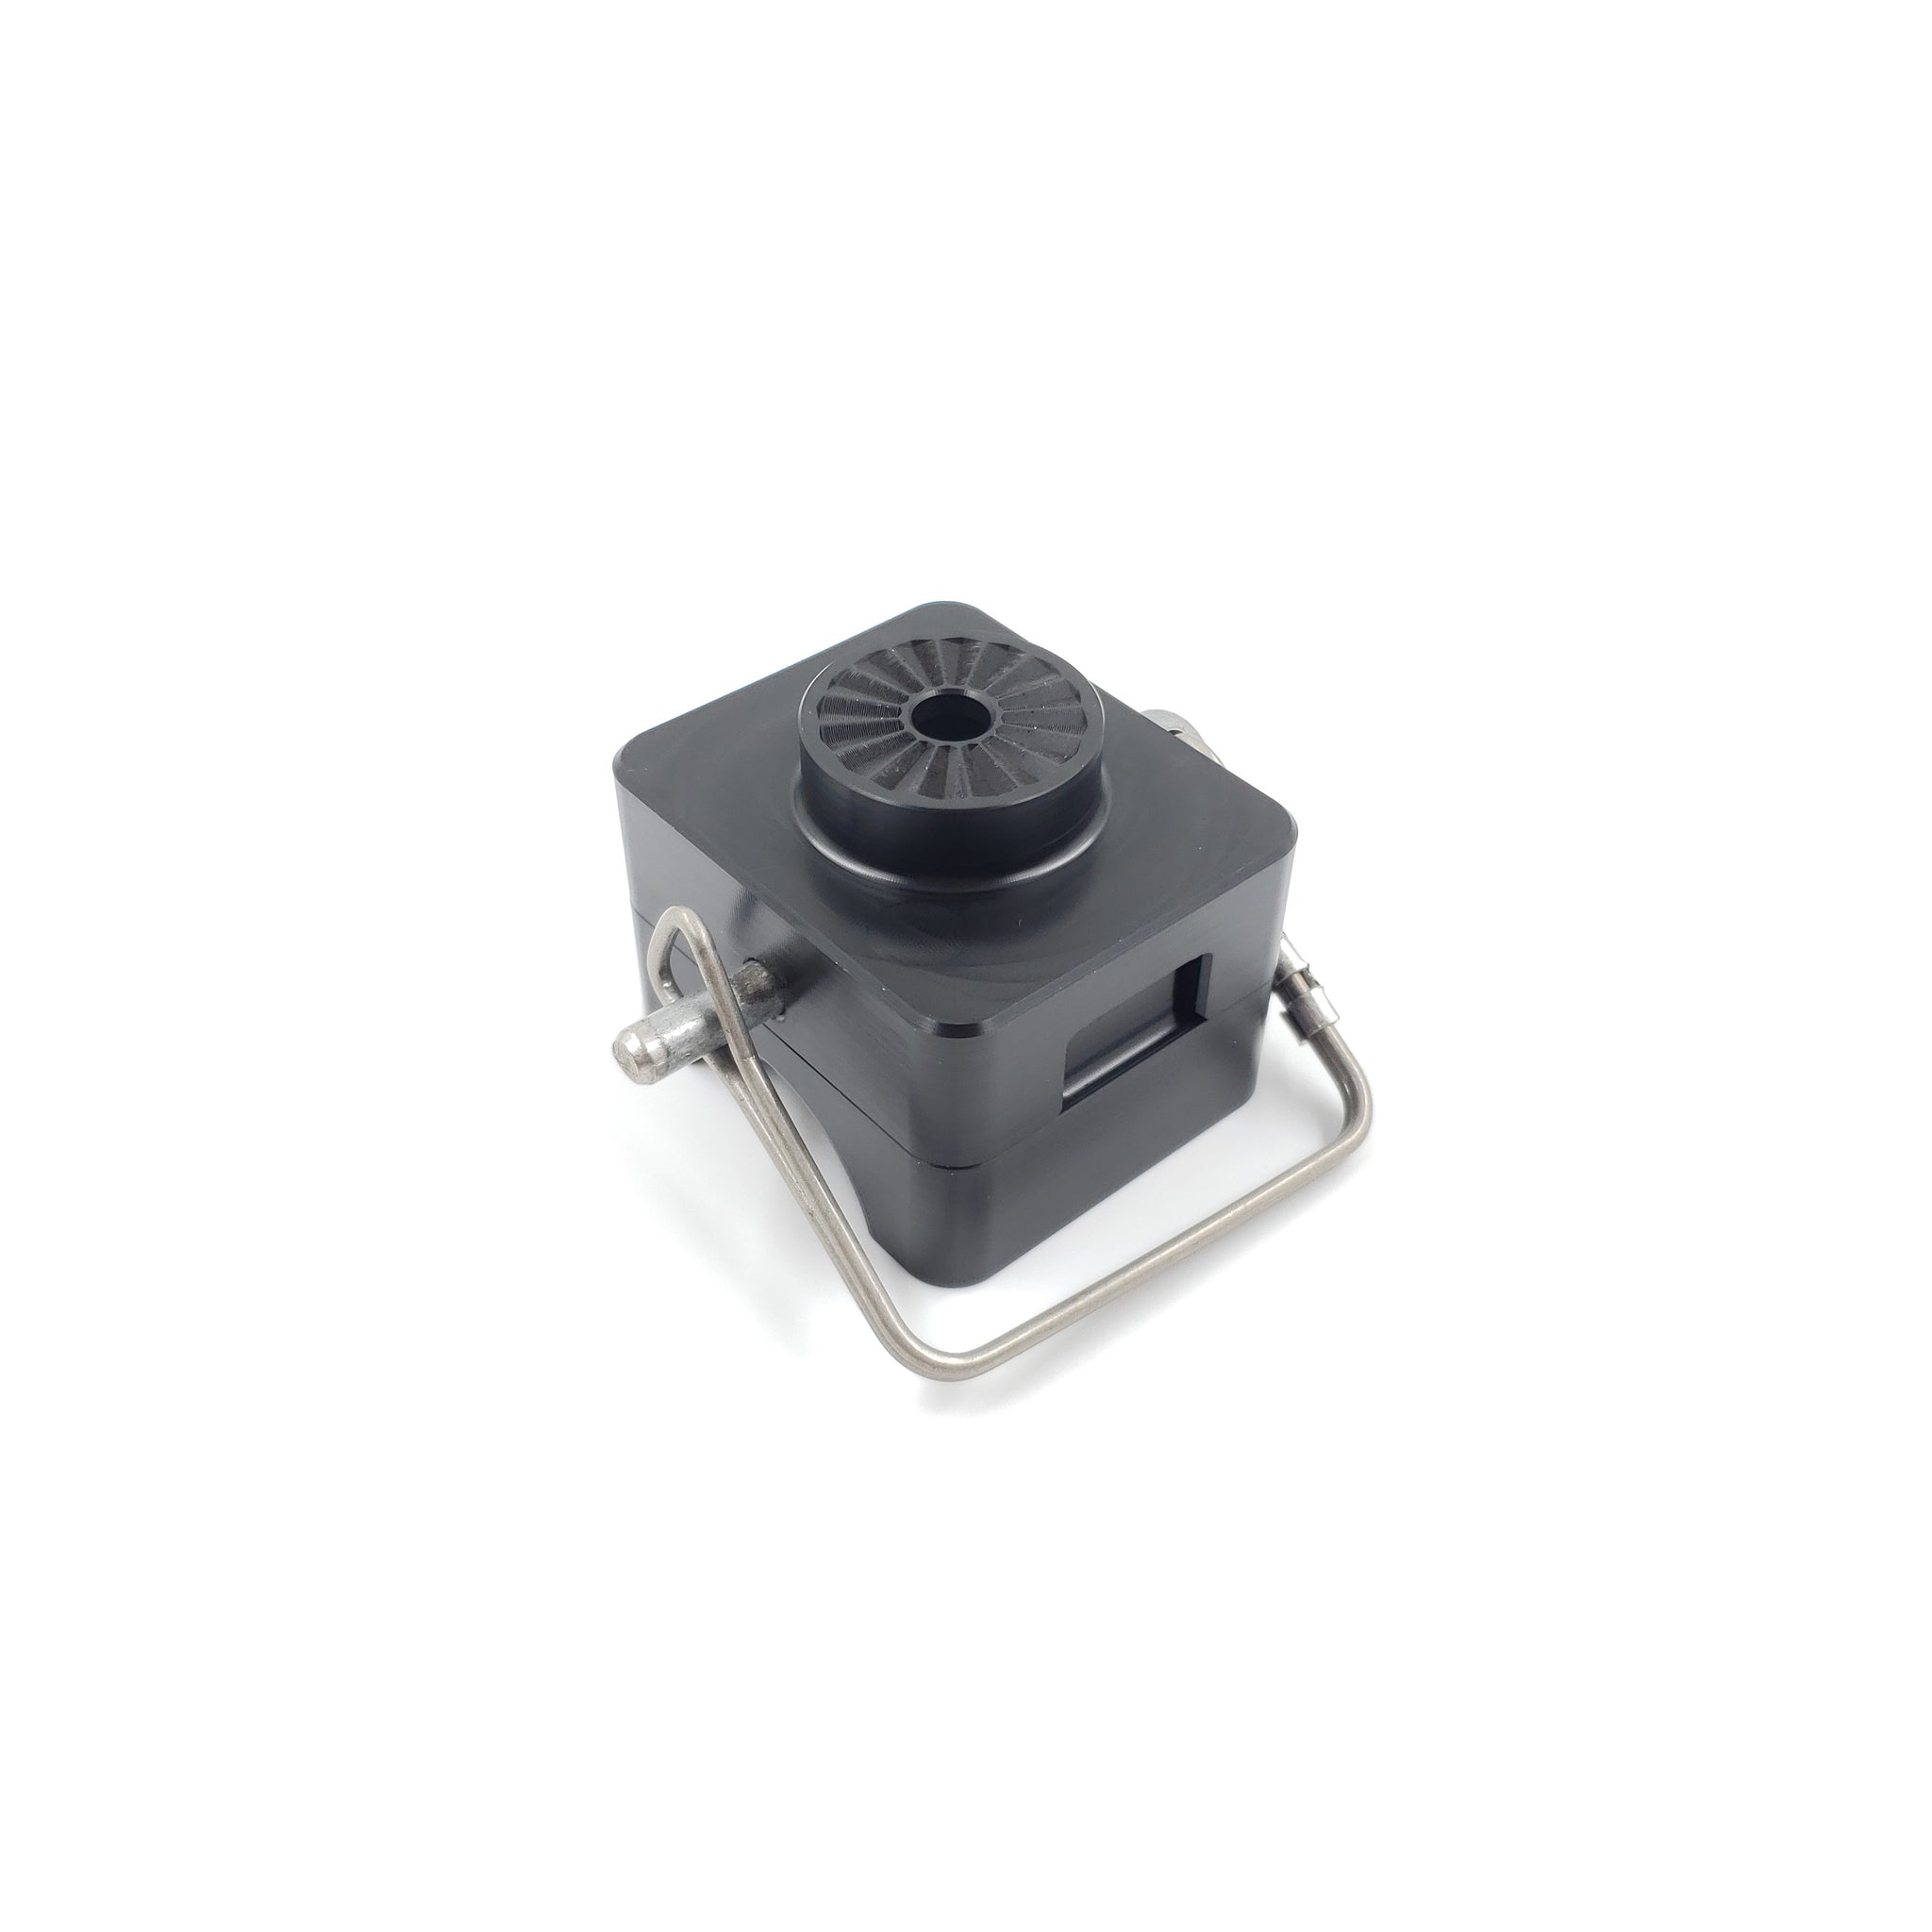 0 DEGREE QUICK RELEASE STRAIGHT TRANSDUCER MOUNT ADAPTER FOR